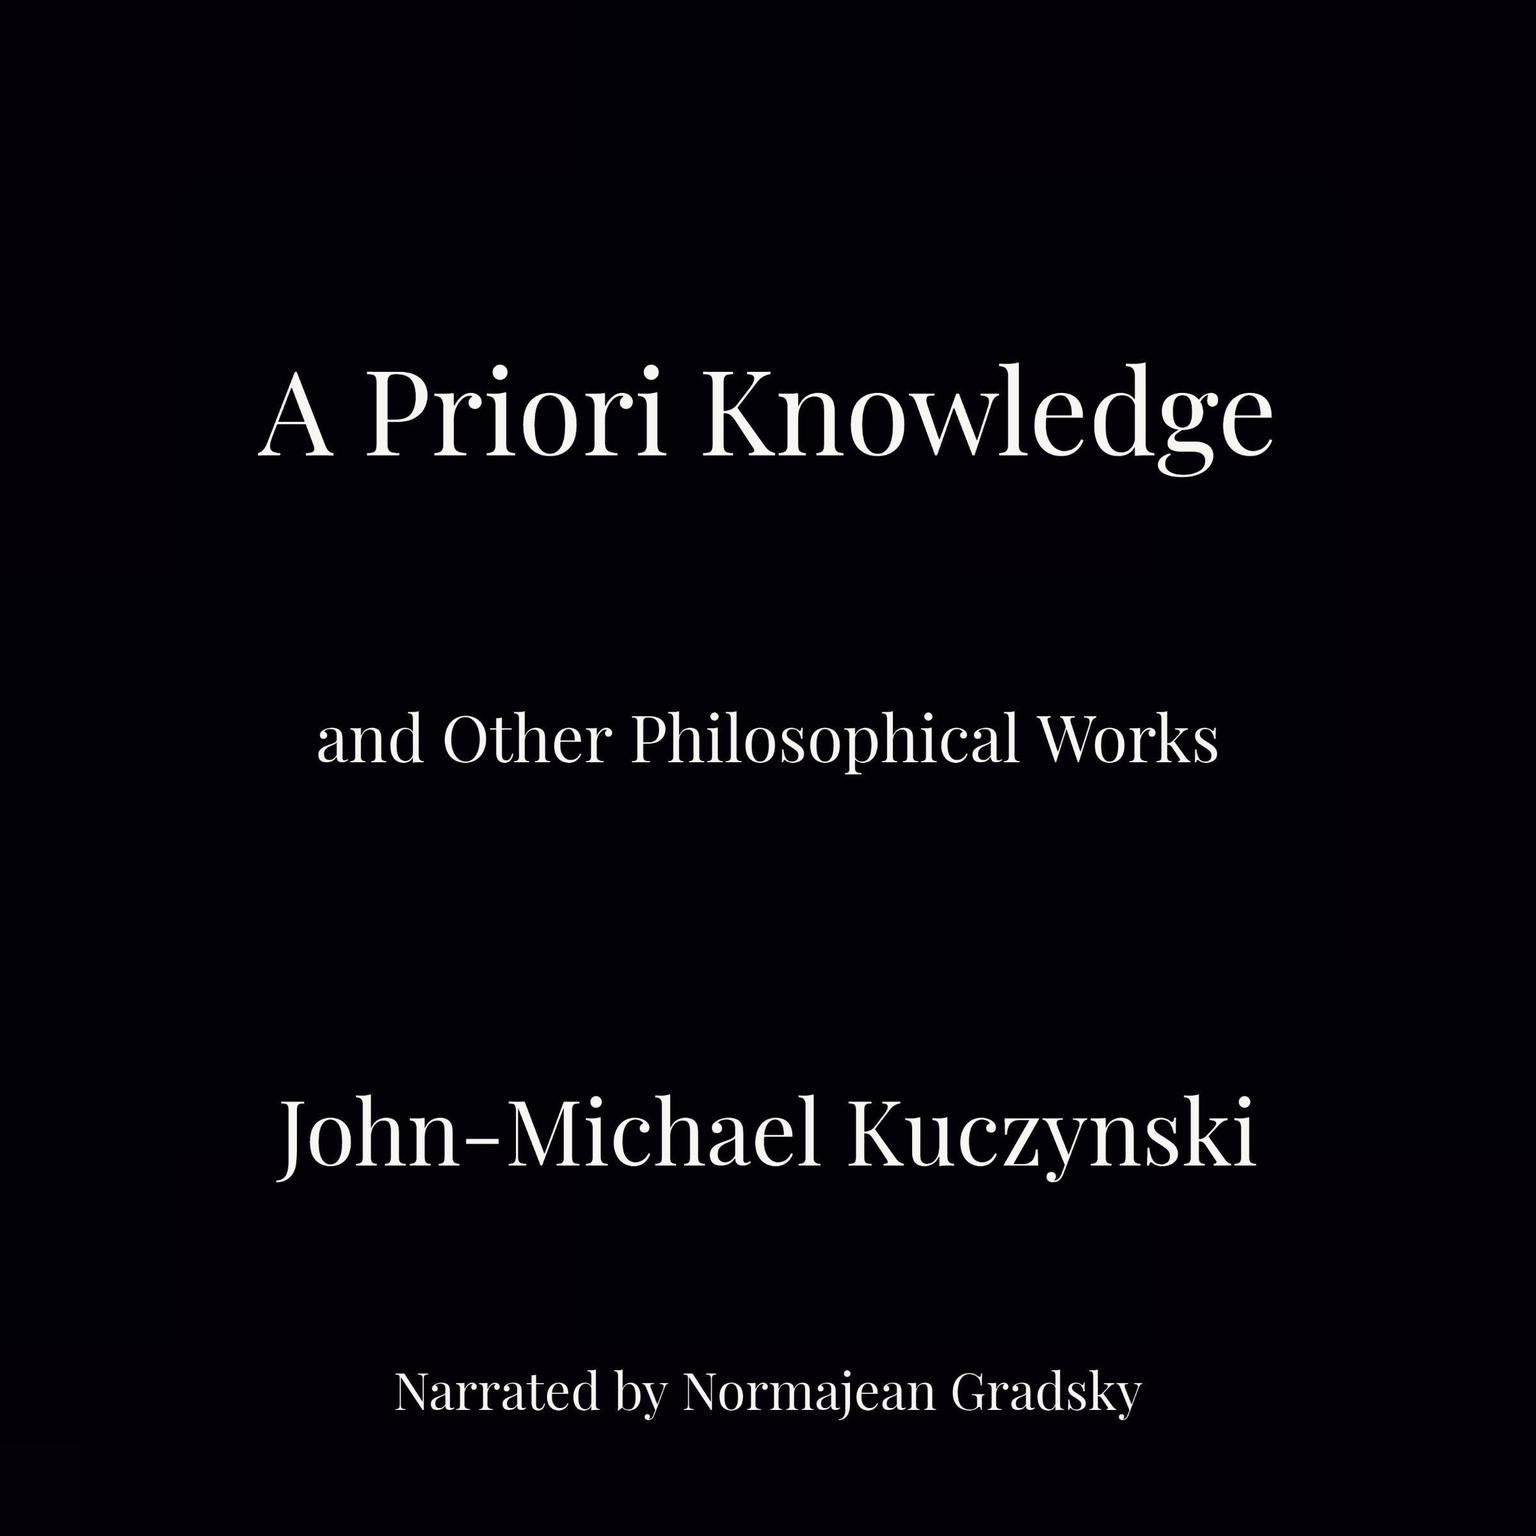 A Priori Knowledge and Other Philosophical Works Audiobook, by John-Michael Kuczynski